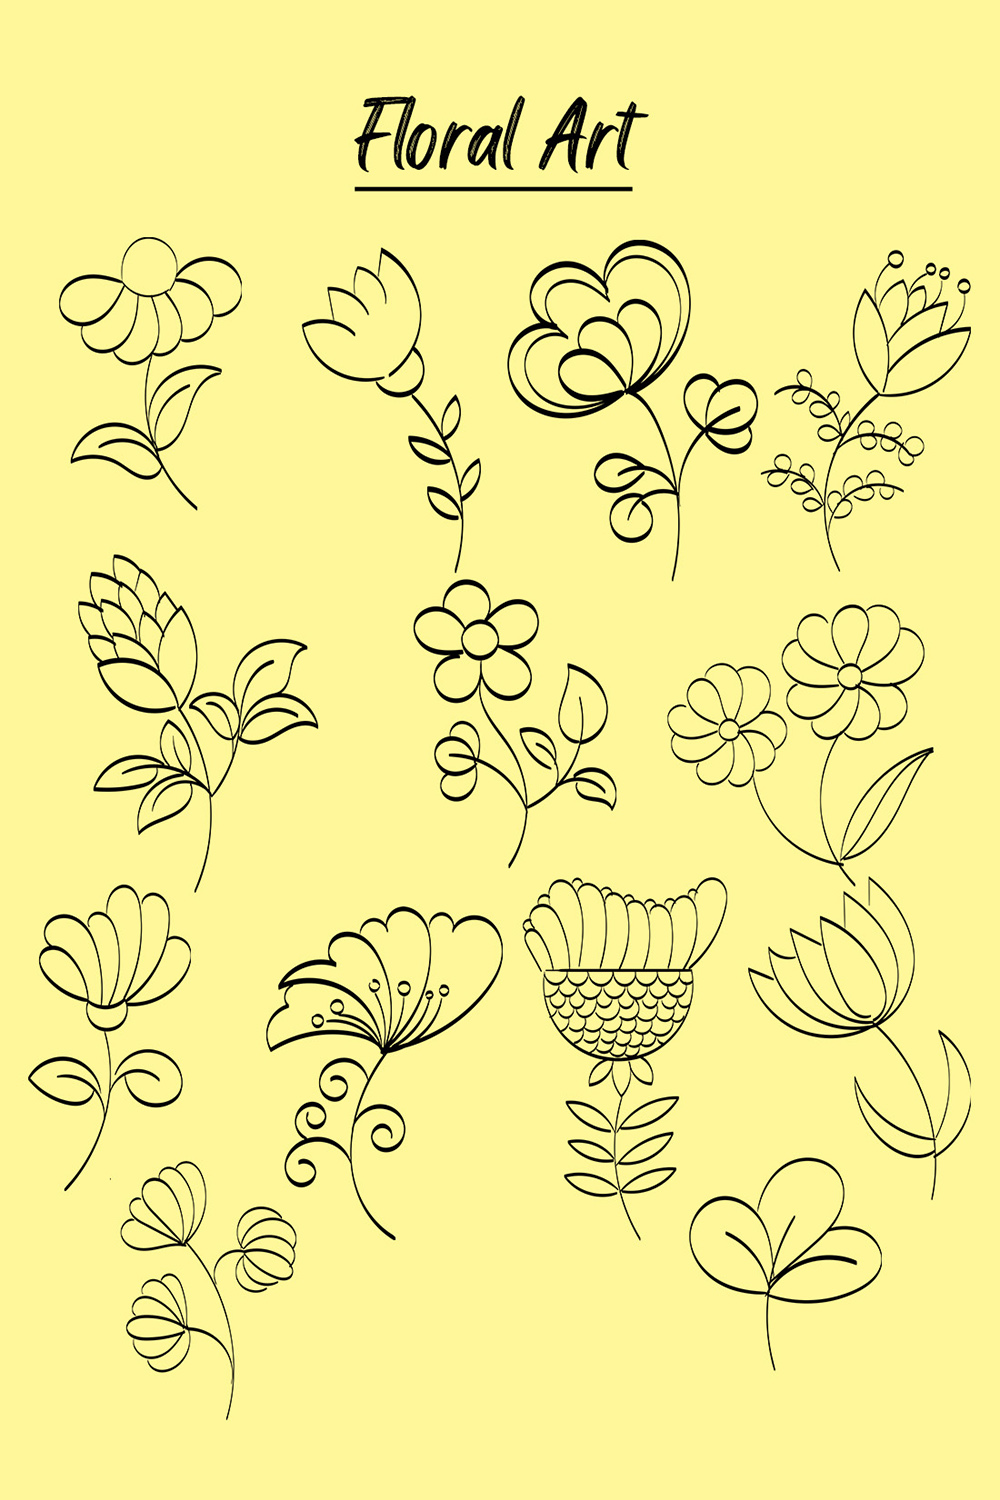 Floral Art Drawing with Line-art Pinterest image.